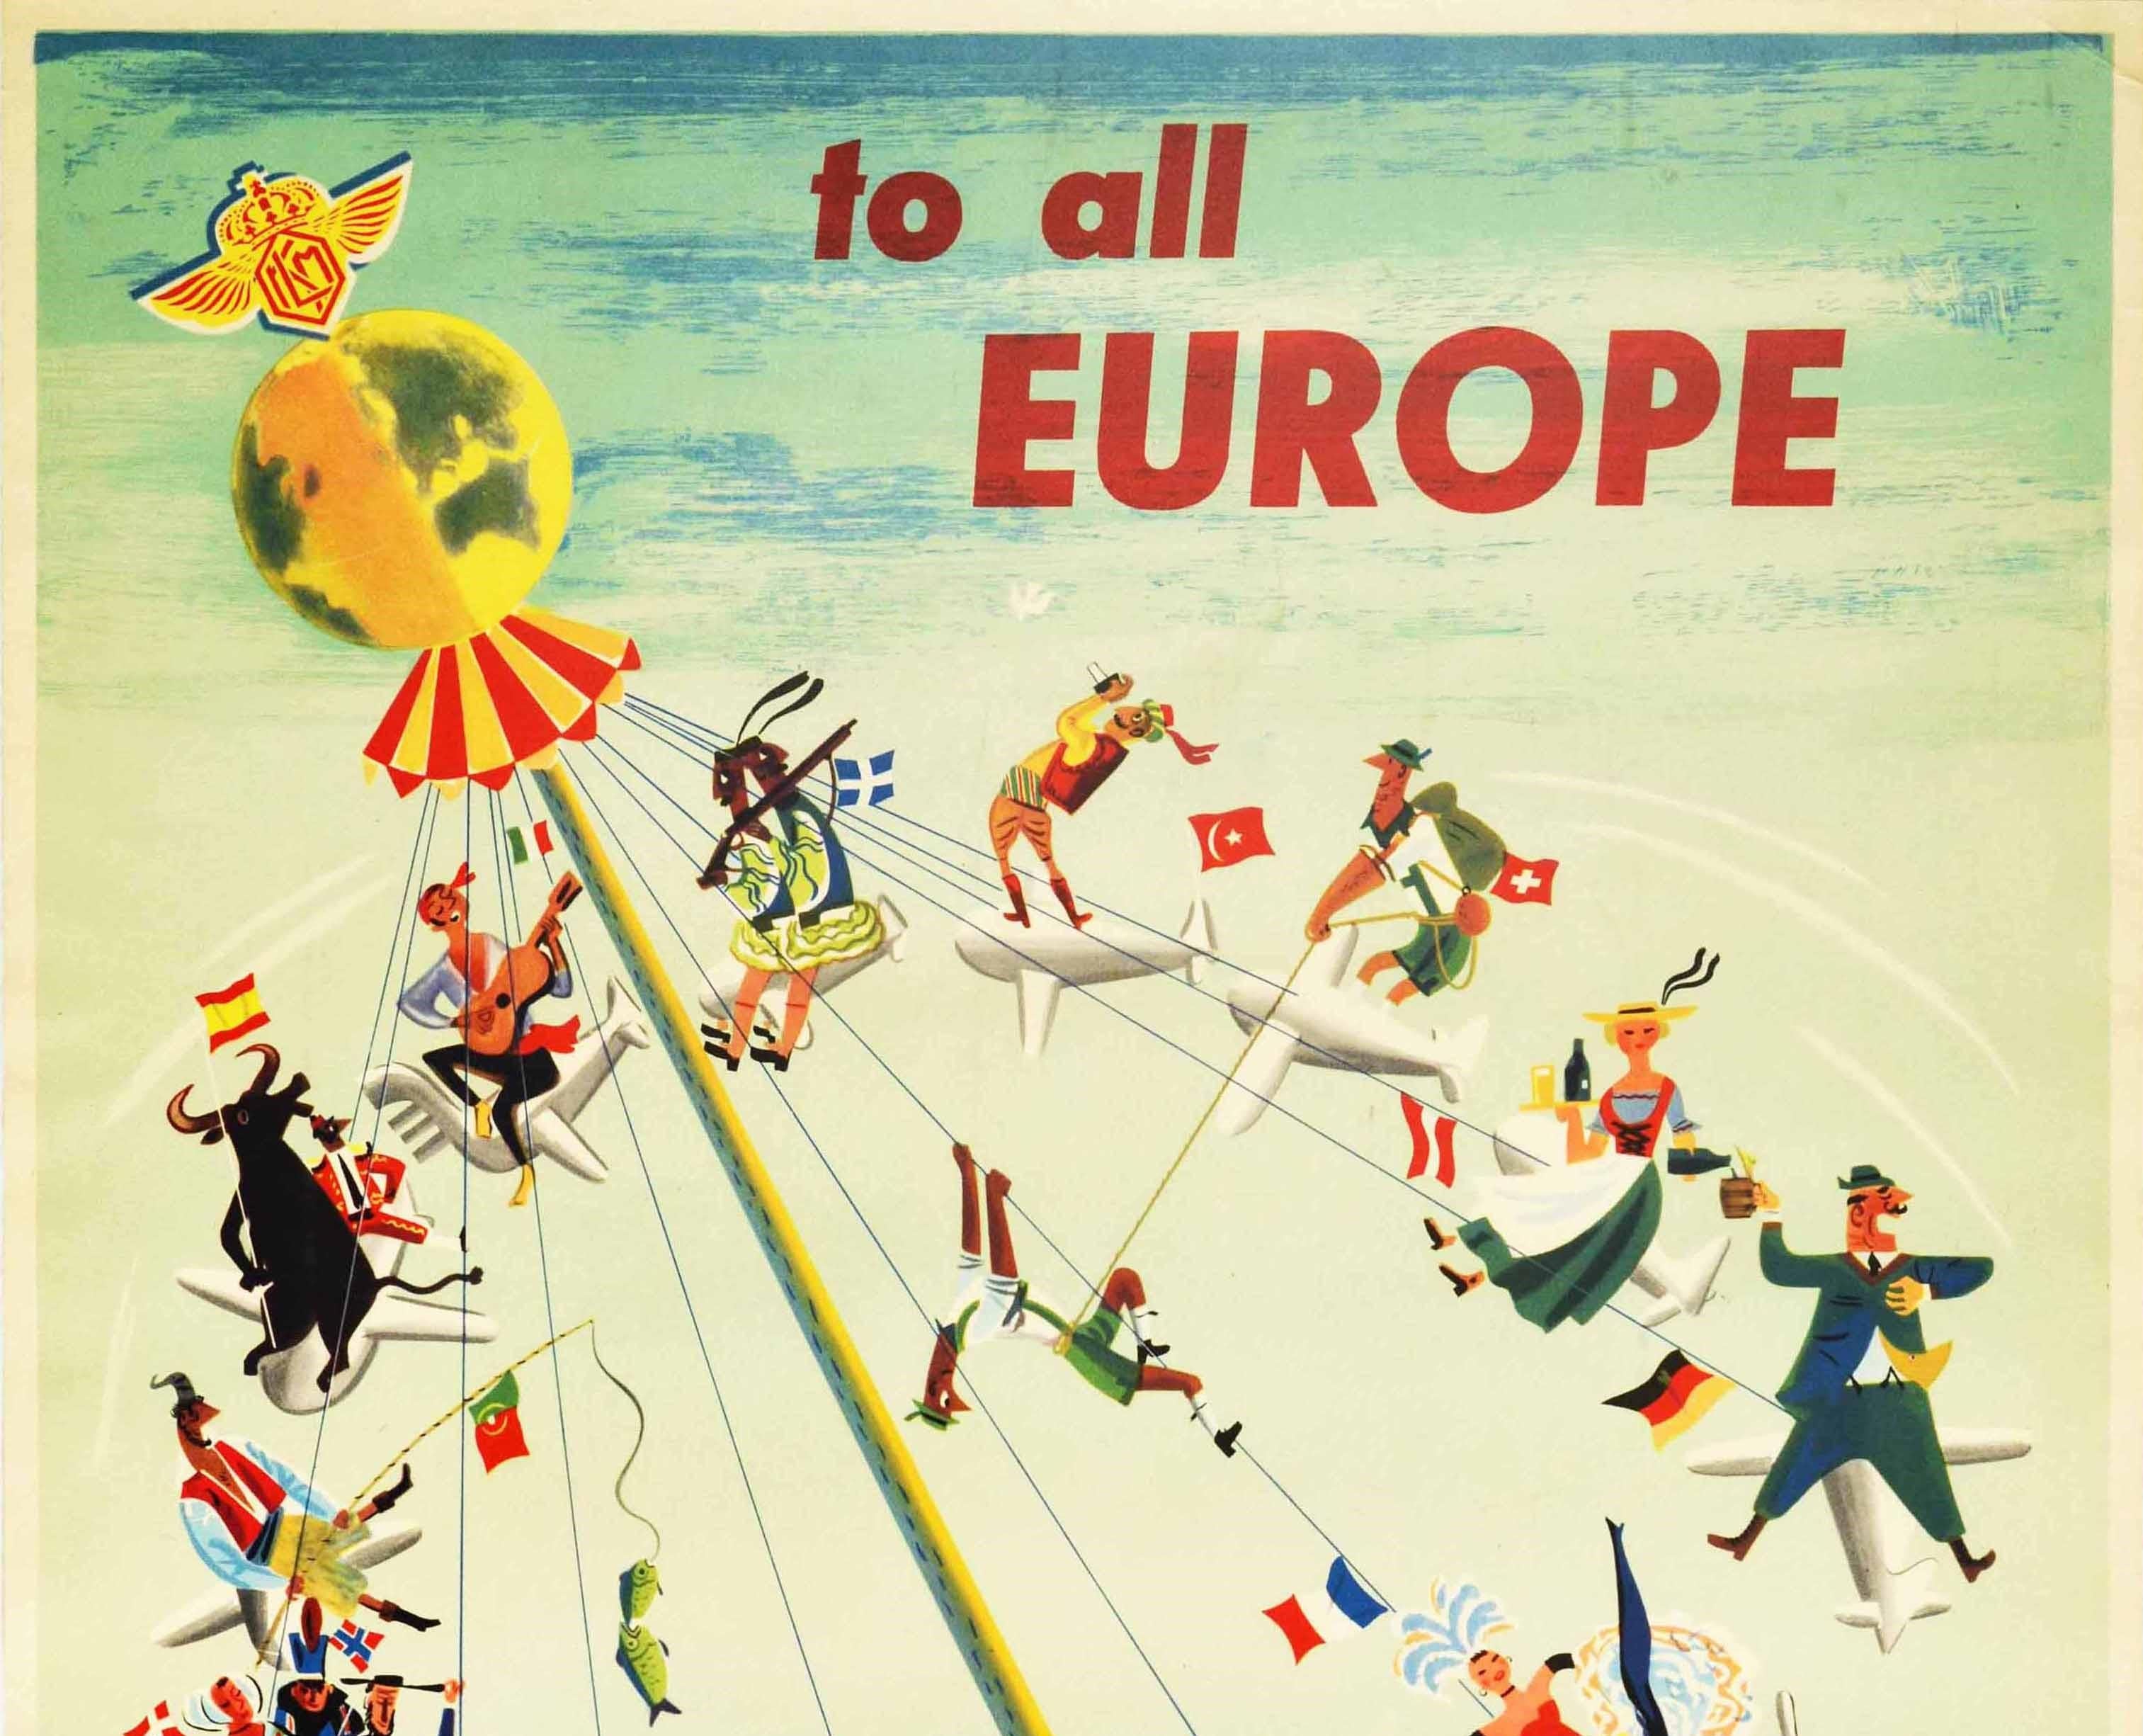 Original vintage travel poster issued by KLM Royal Dutch Airlines - Fly KLM to all Europe. The poster features a colourful and fun illustration by Emile Brumsteede (Mile; 1911-1962) of people representing European nations on a merry-go-round